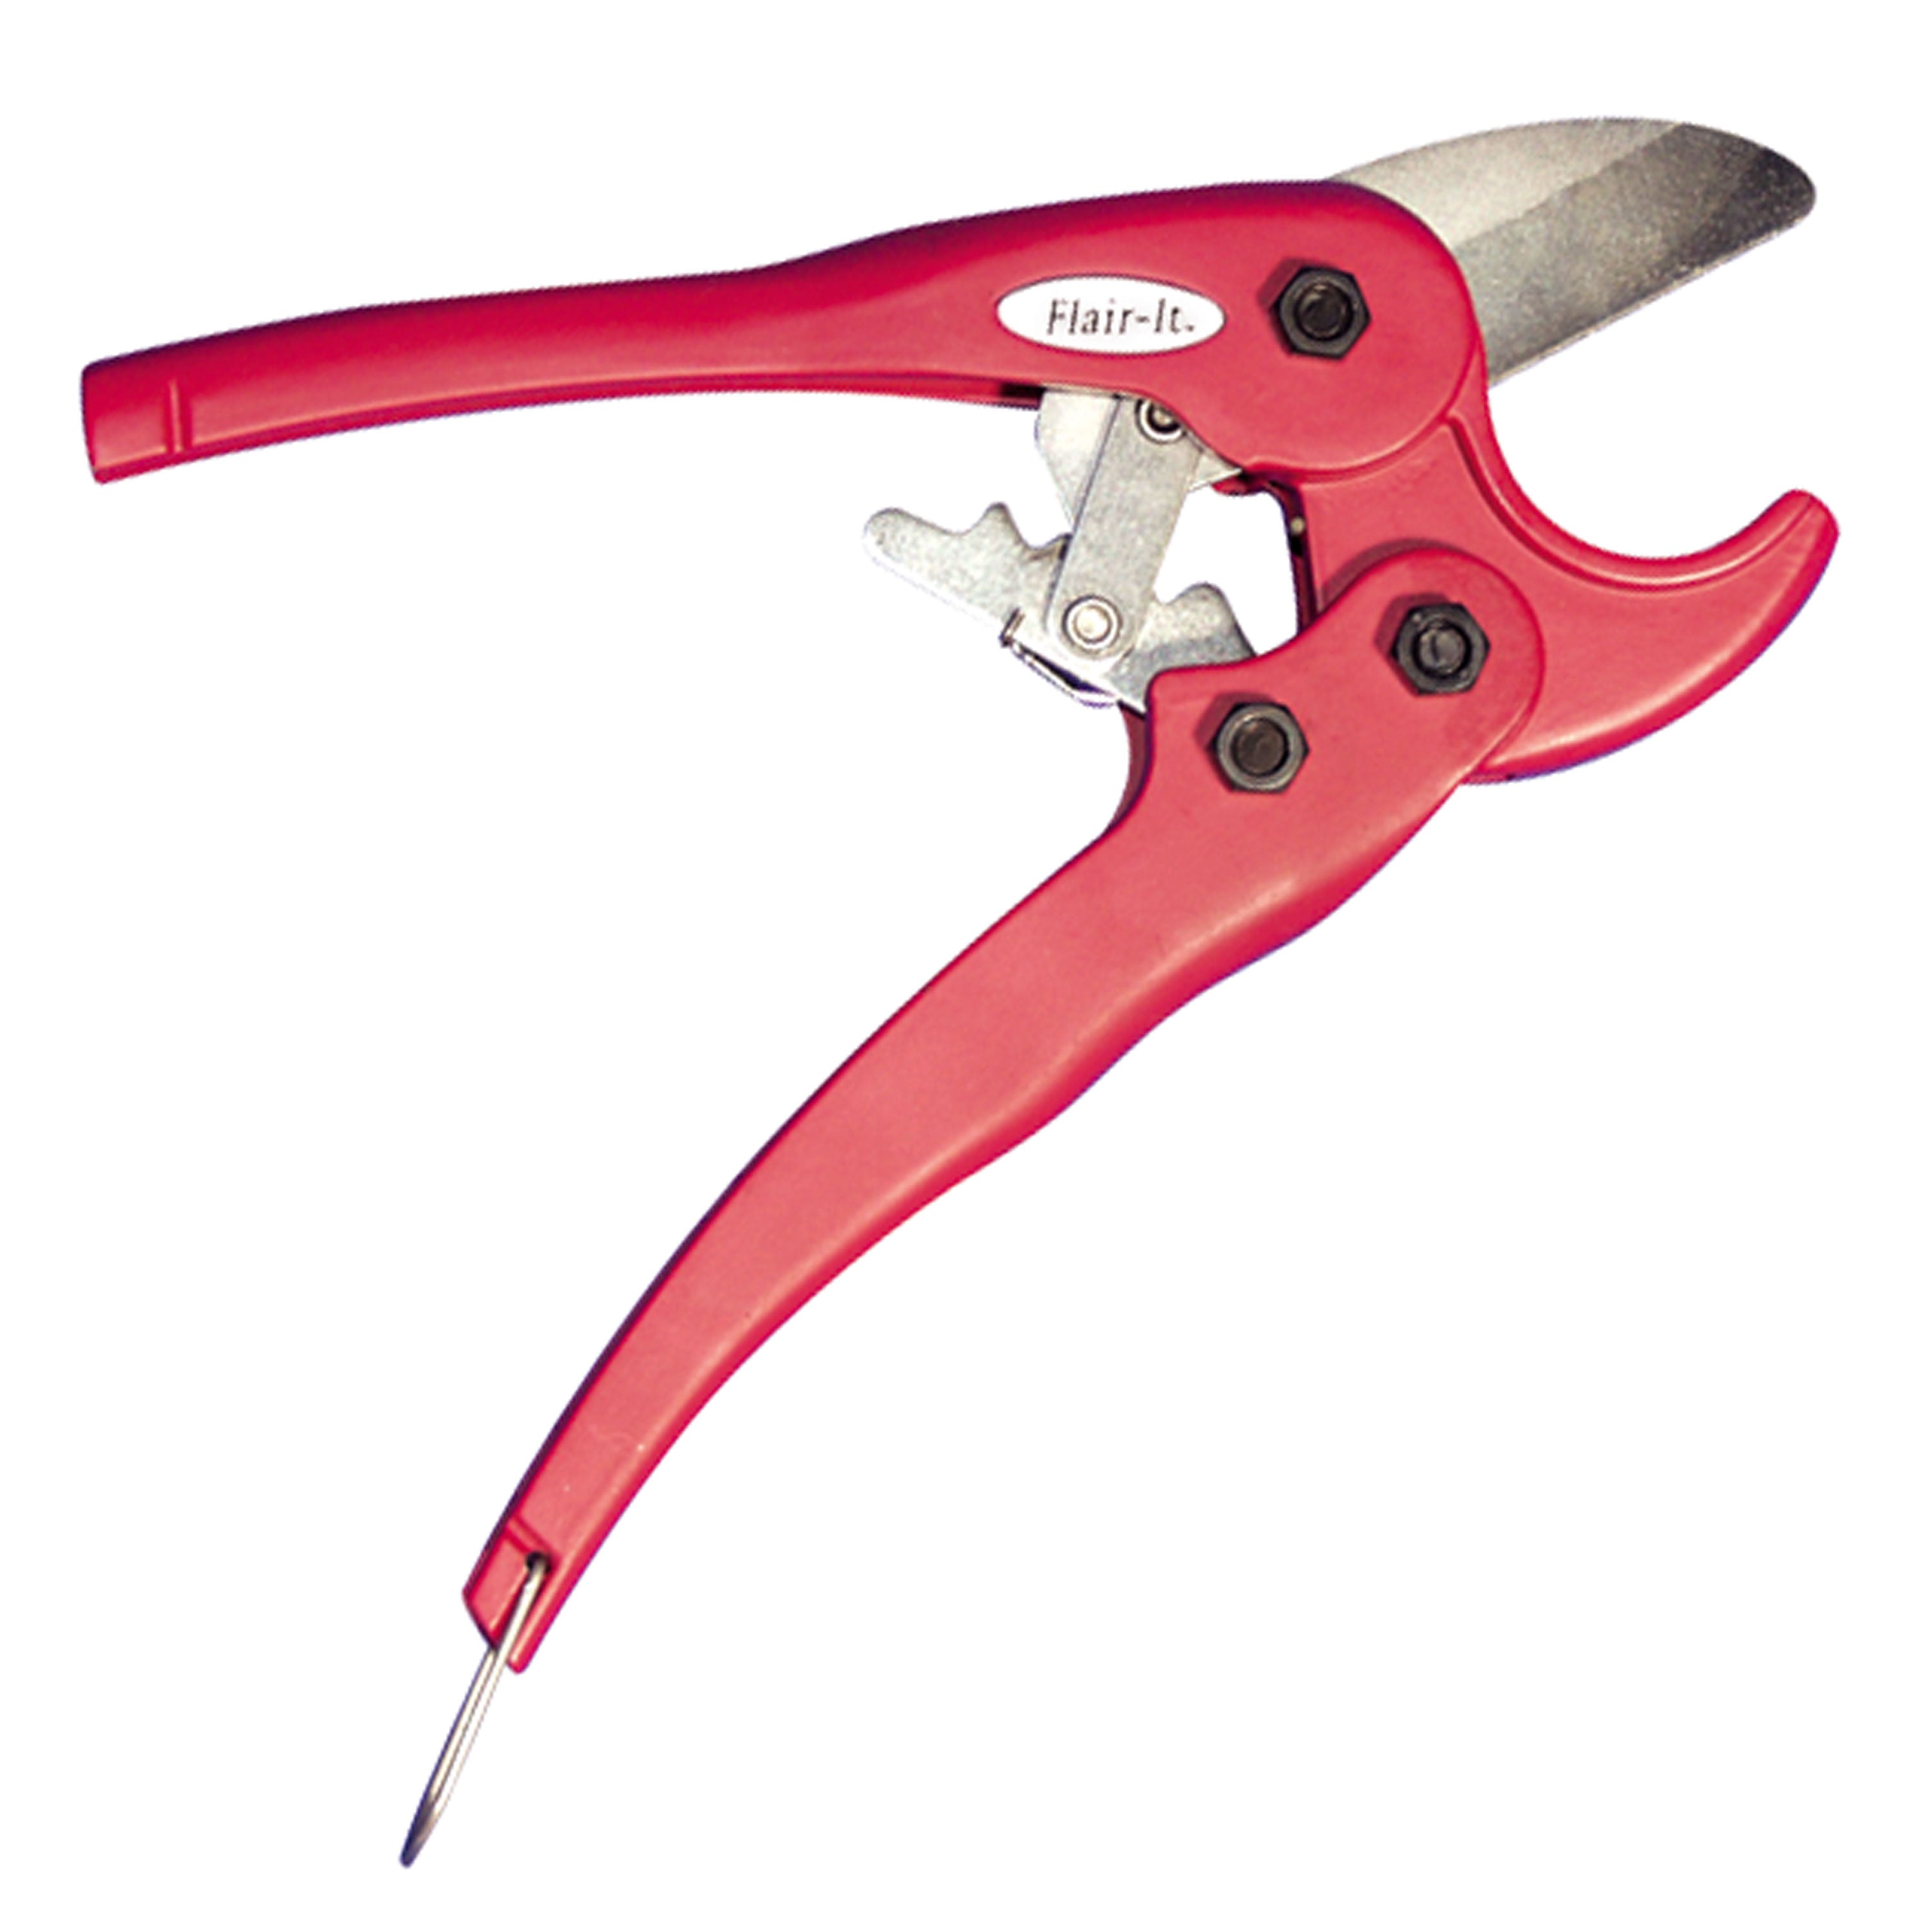 Flair-It 11175 Universal Pipe Cutter 01175